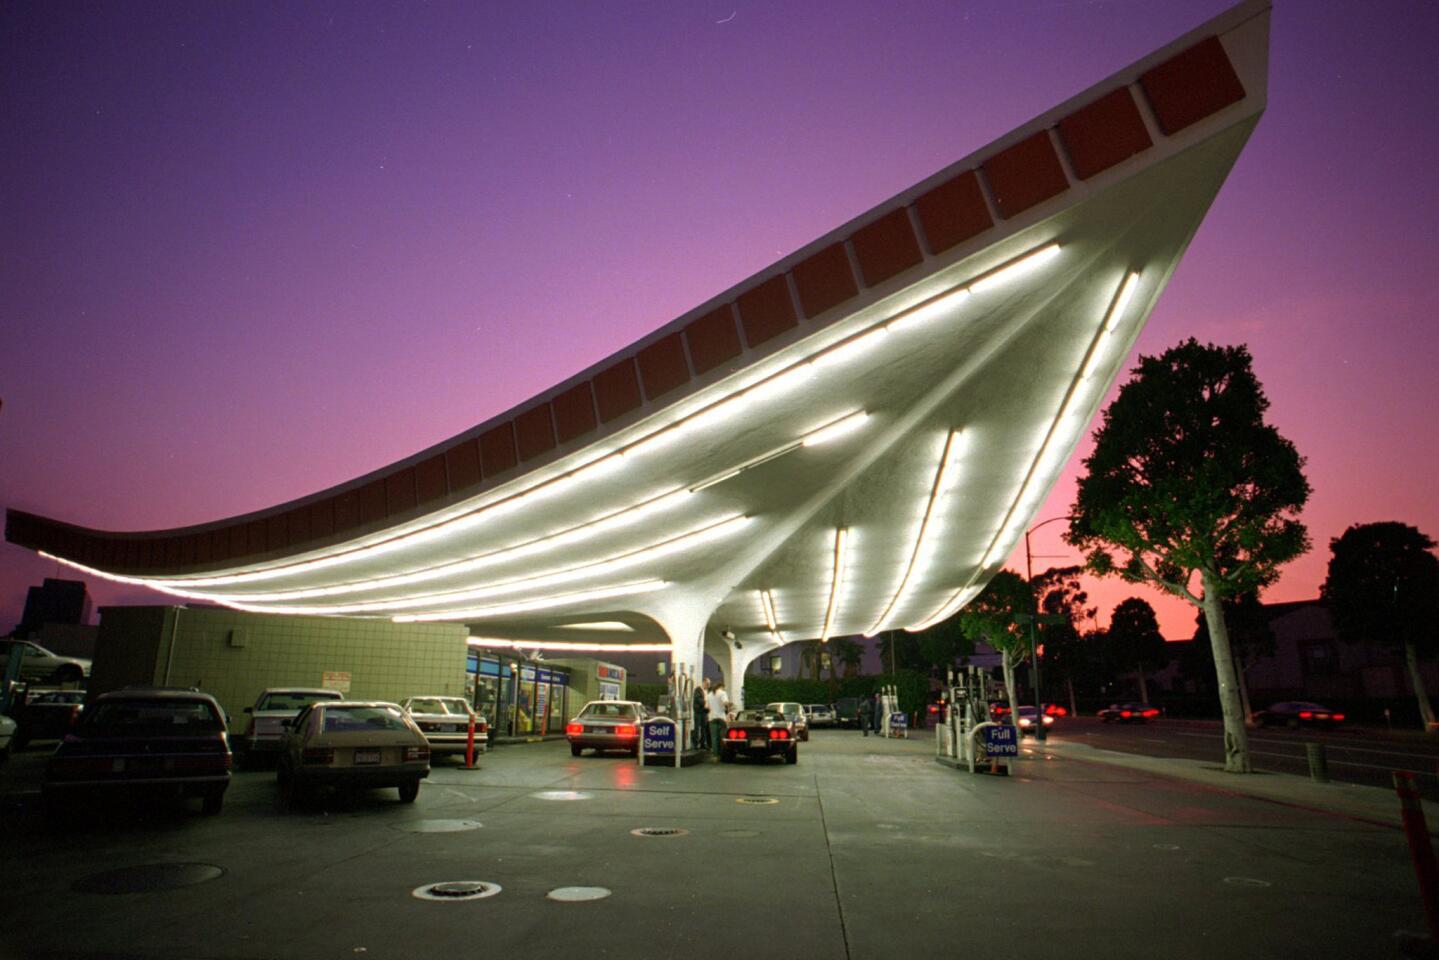 Jack Colker's 76 station in Beverly Hills was built in 1965 and is considered a prime example of Googie architecture, a playful futuristic style popular in Southern California in the 1950s and '60s.